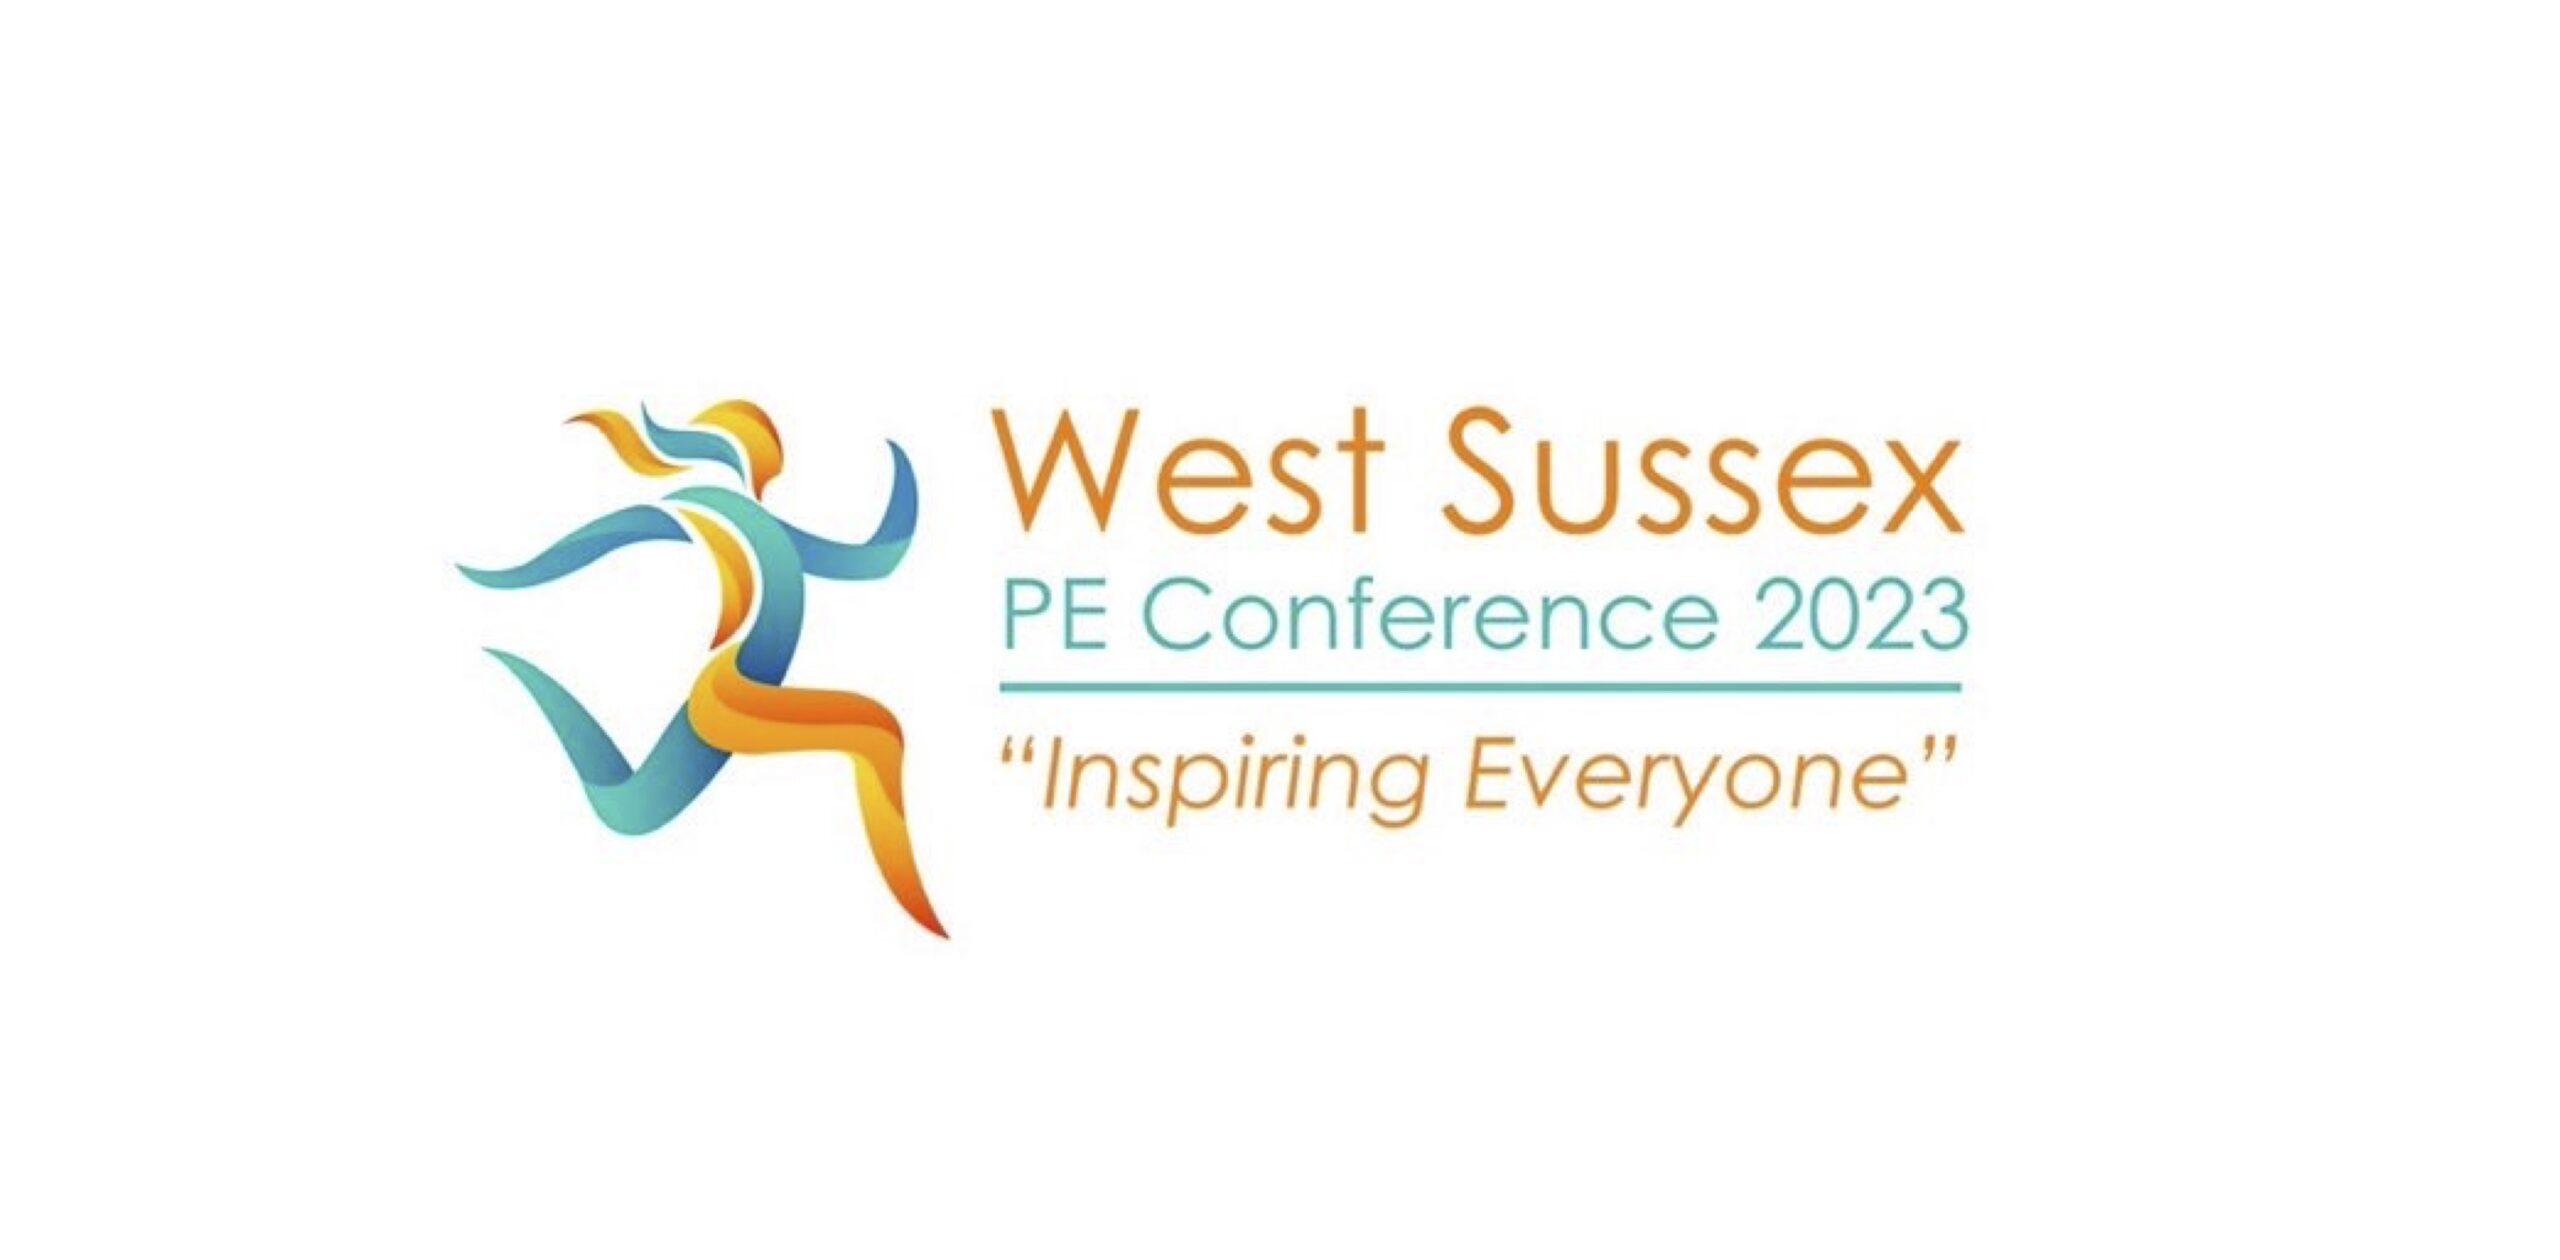 West Sussex PE Conference